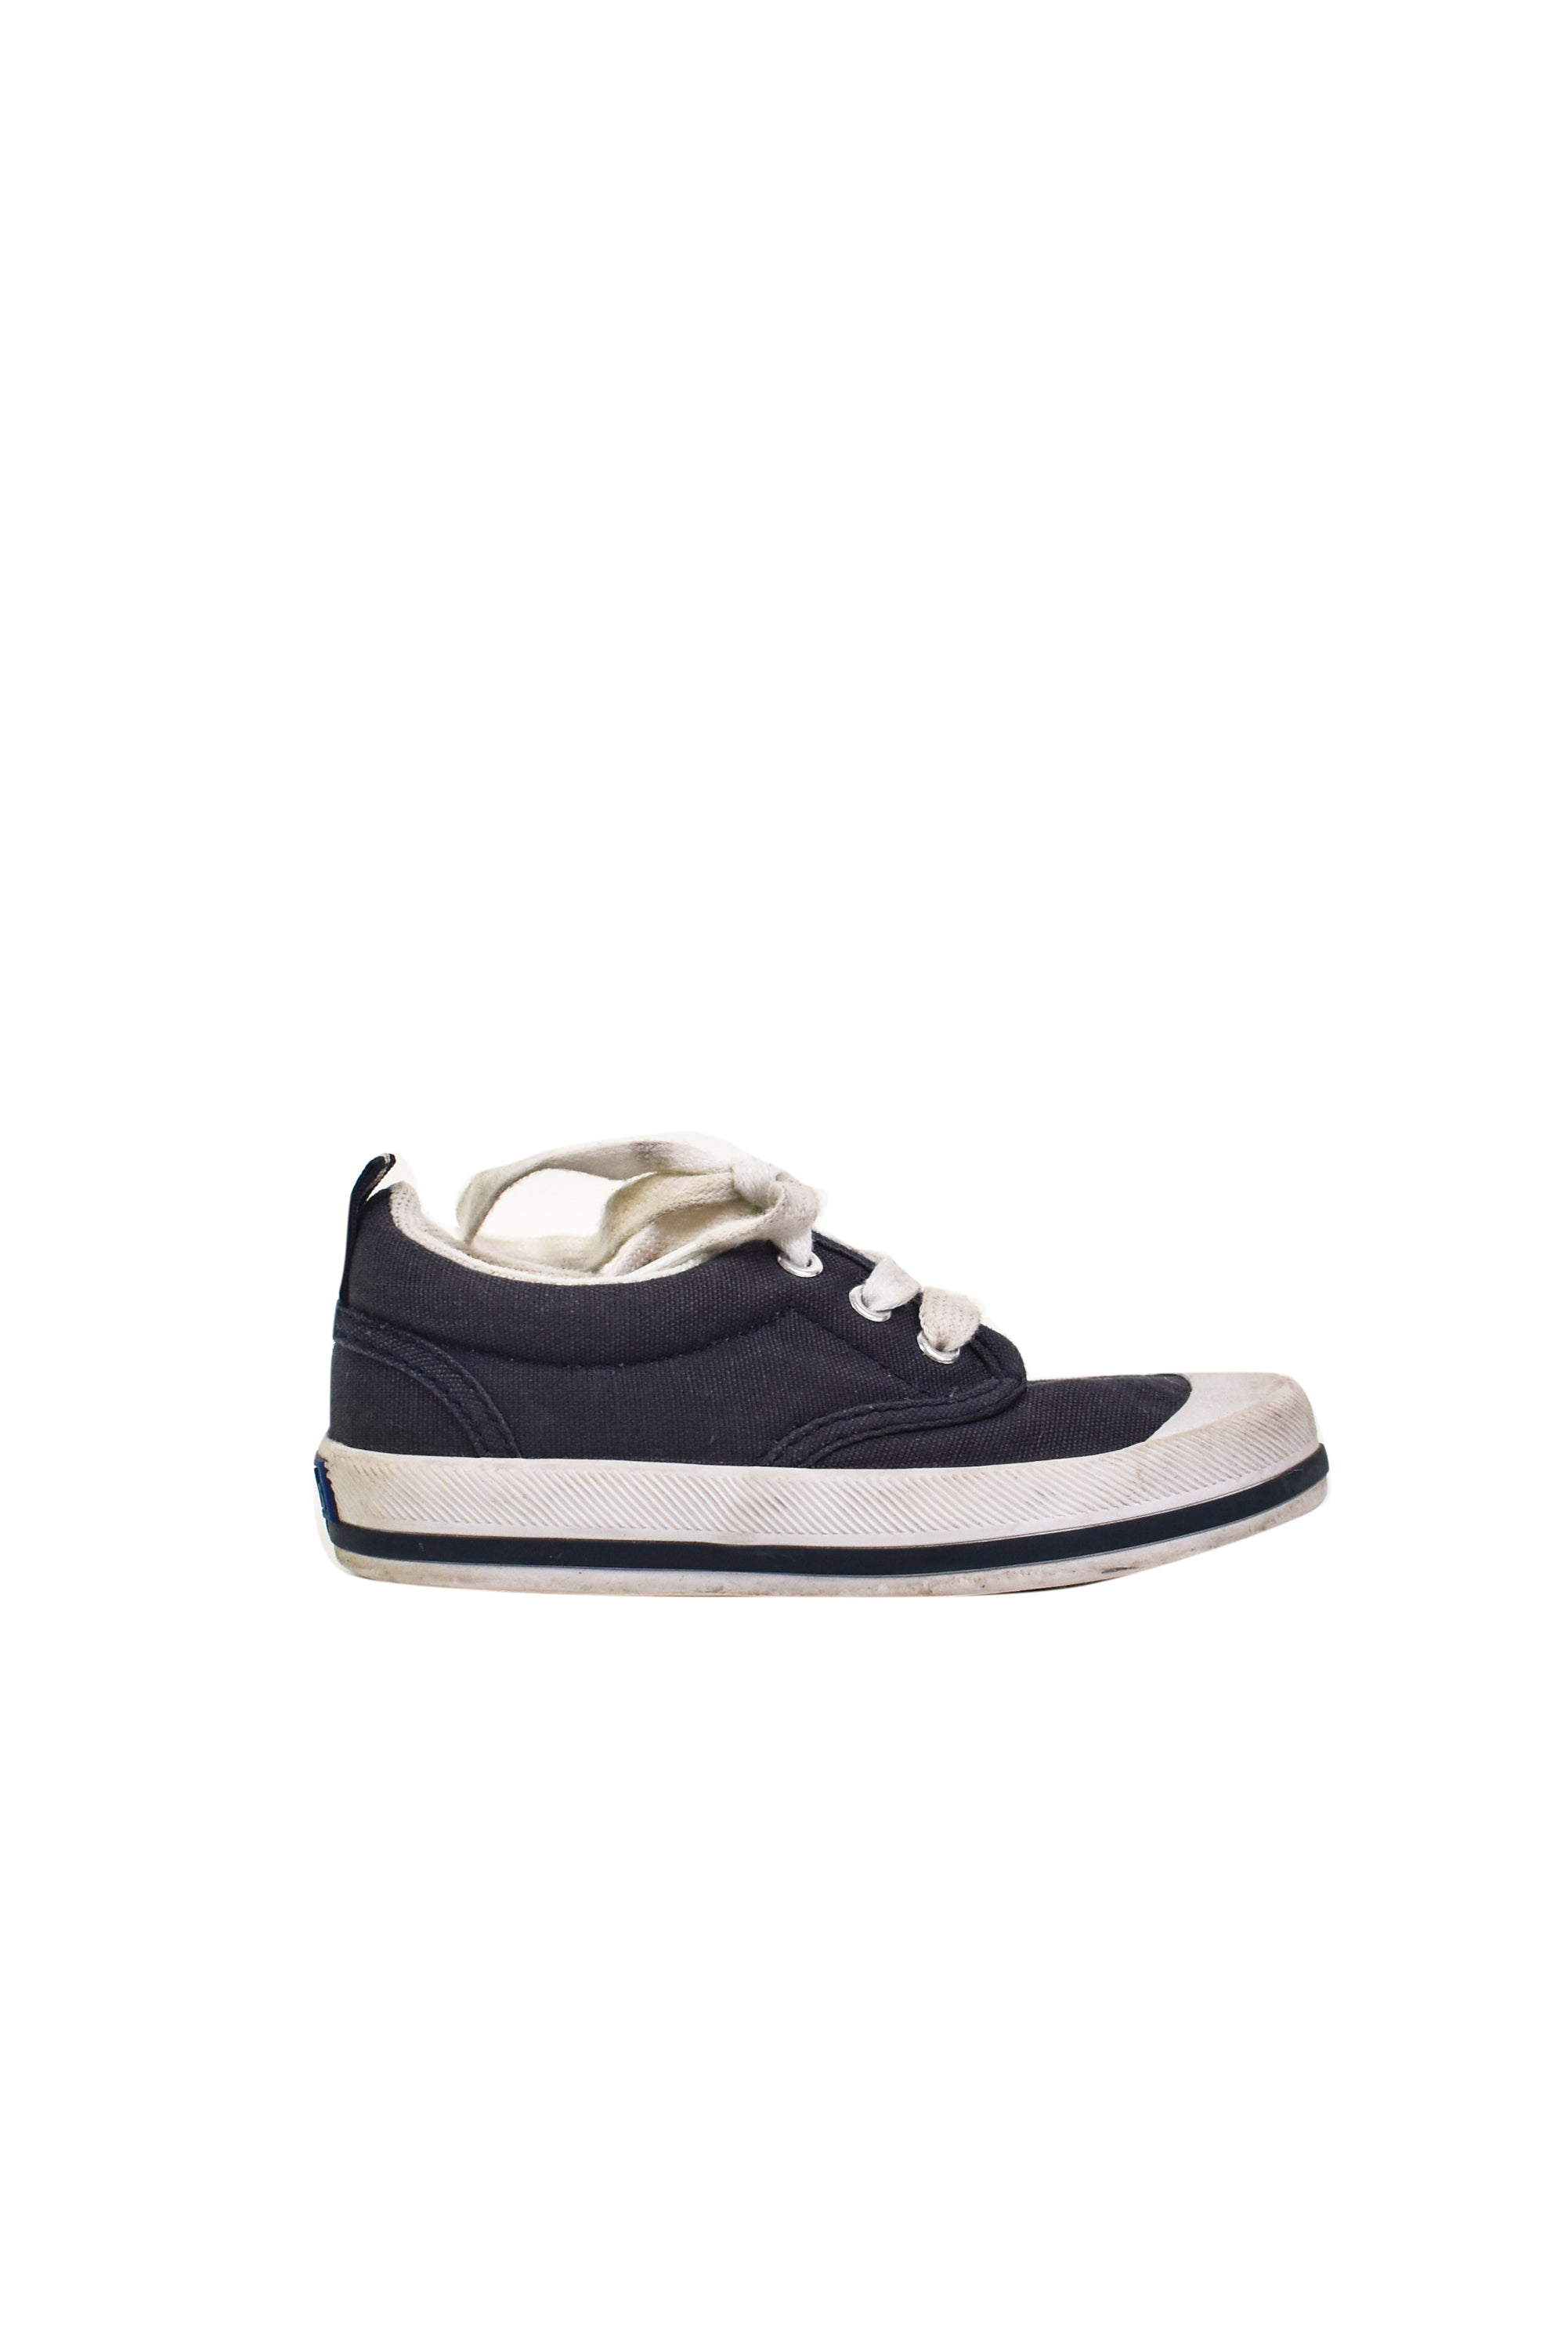 Keds at up to 90% off at Retykle